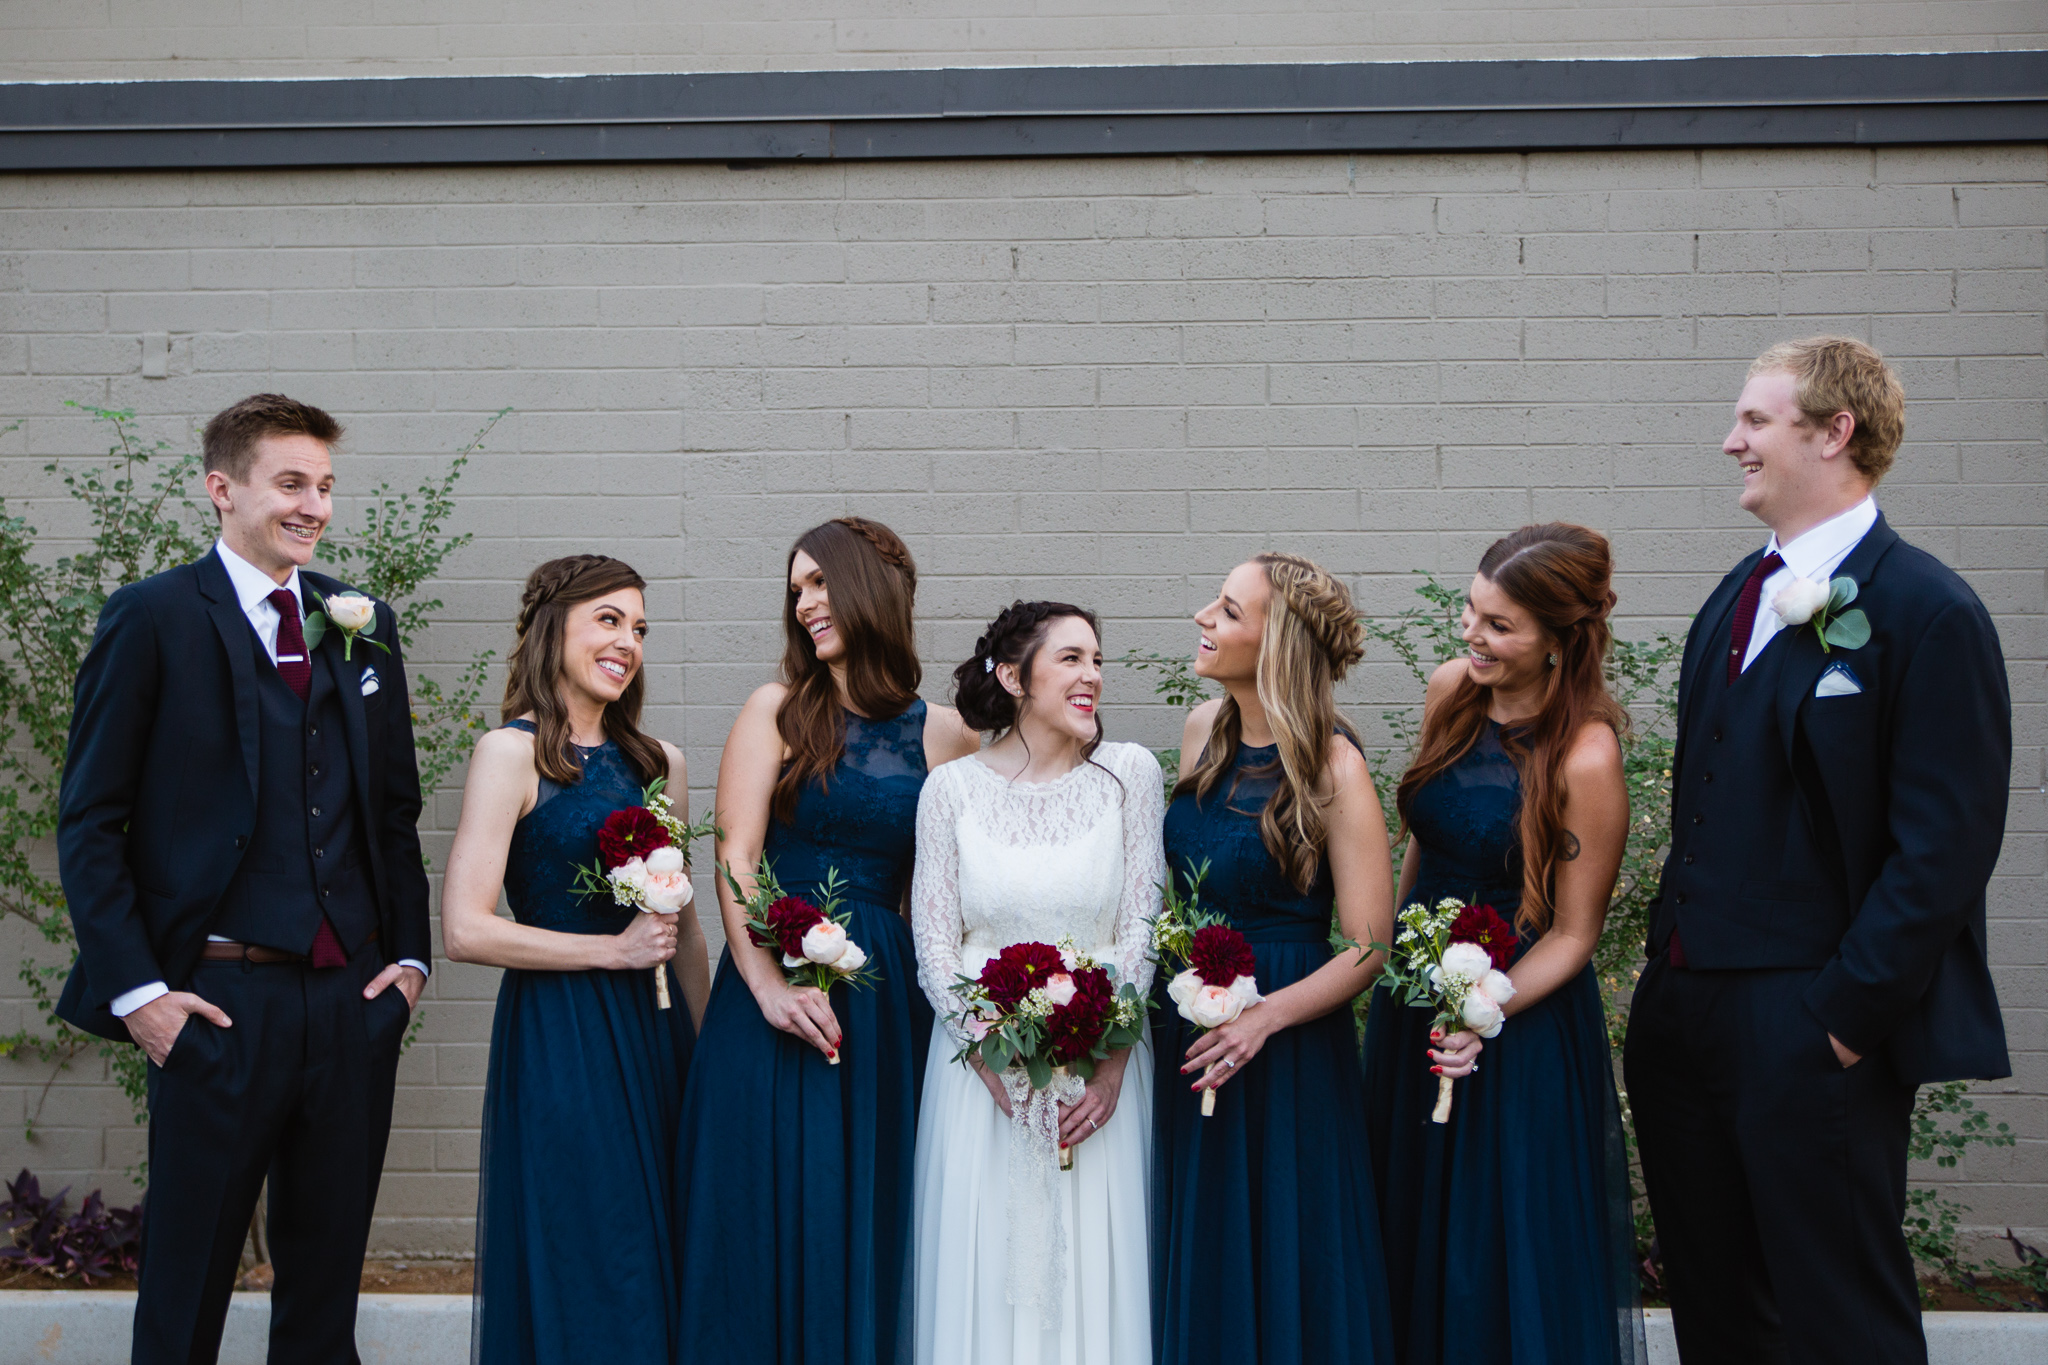 Candid moment with a vintage themed maroon and navy bridal party. Bride with her mixed gender bridal party.